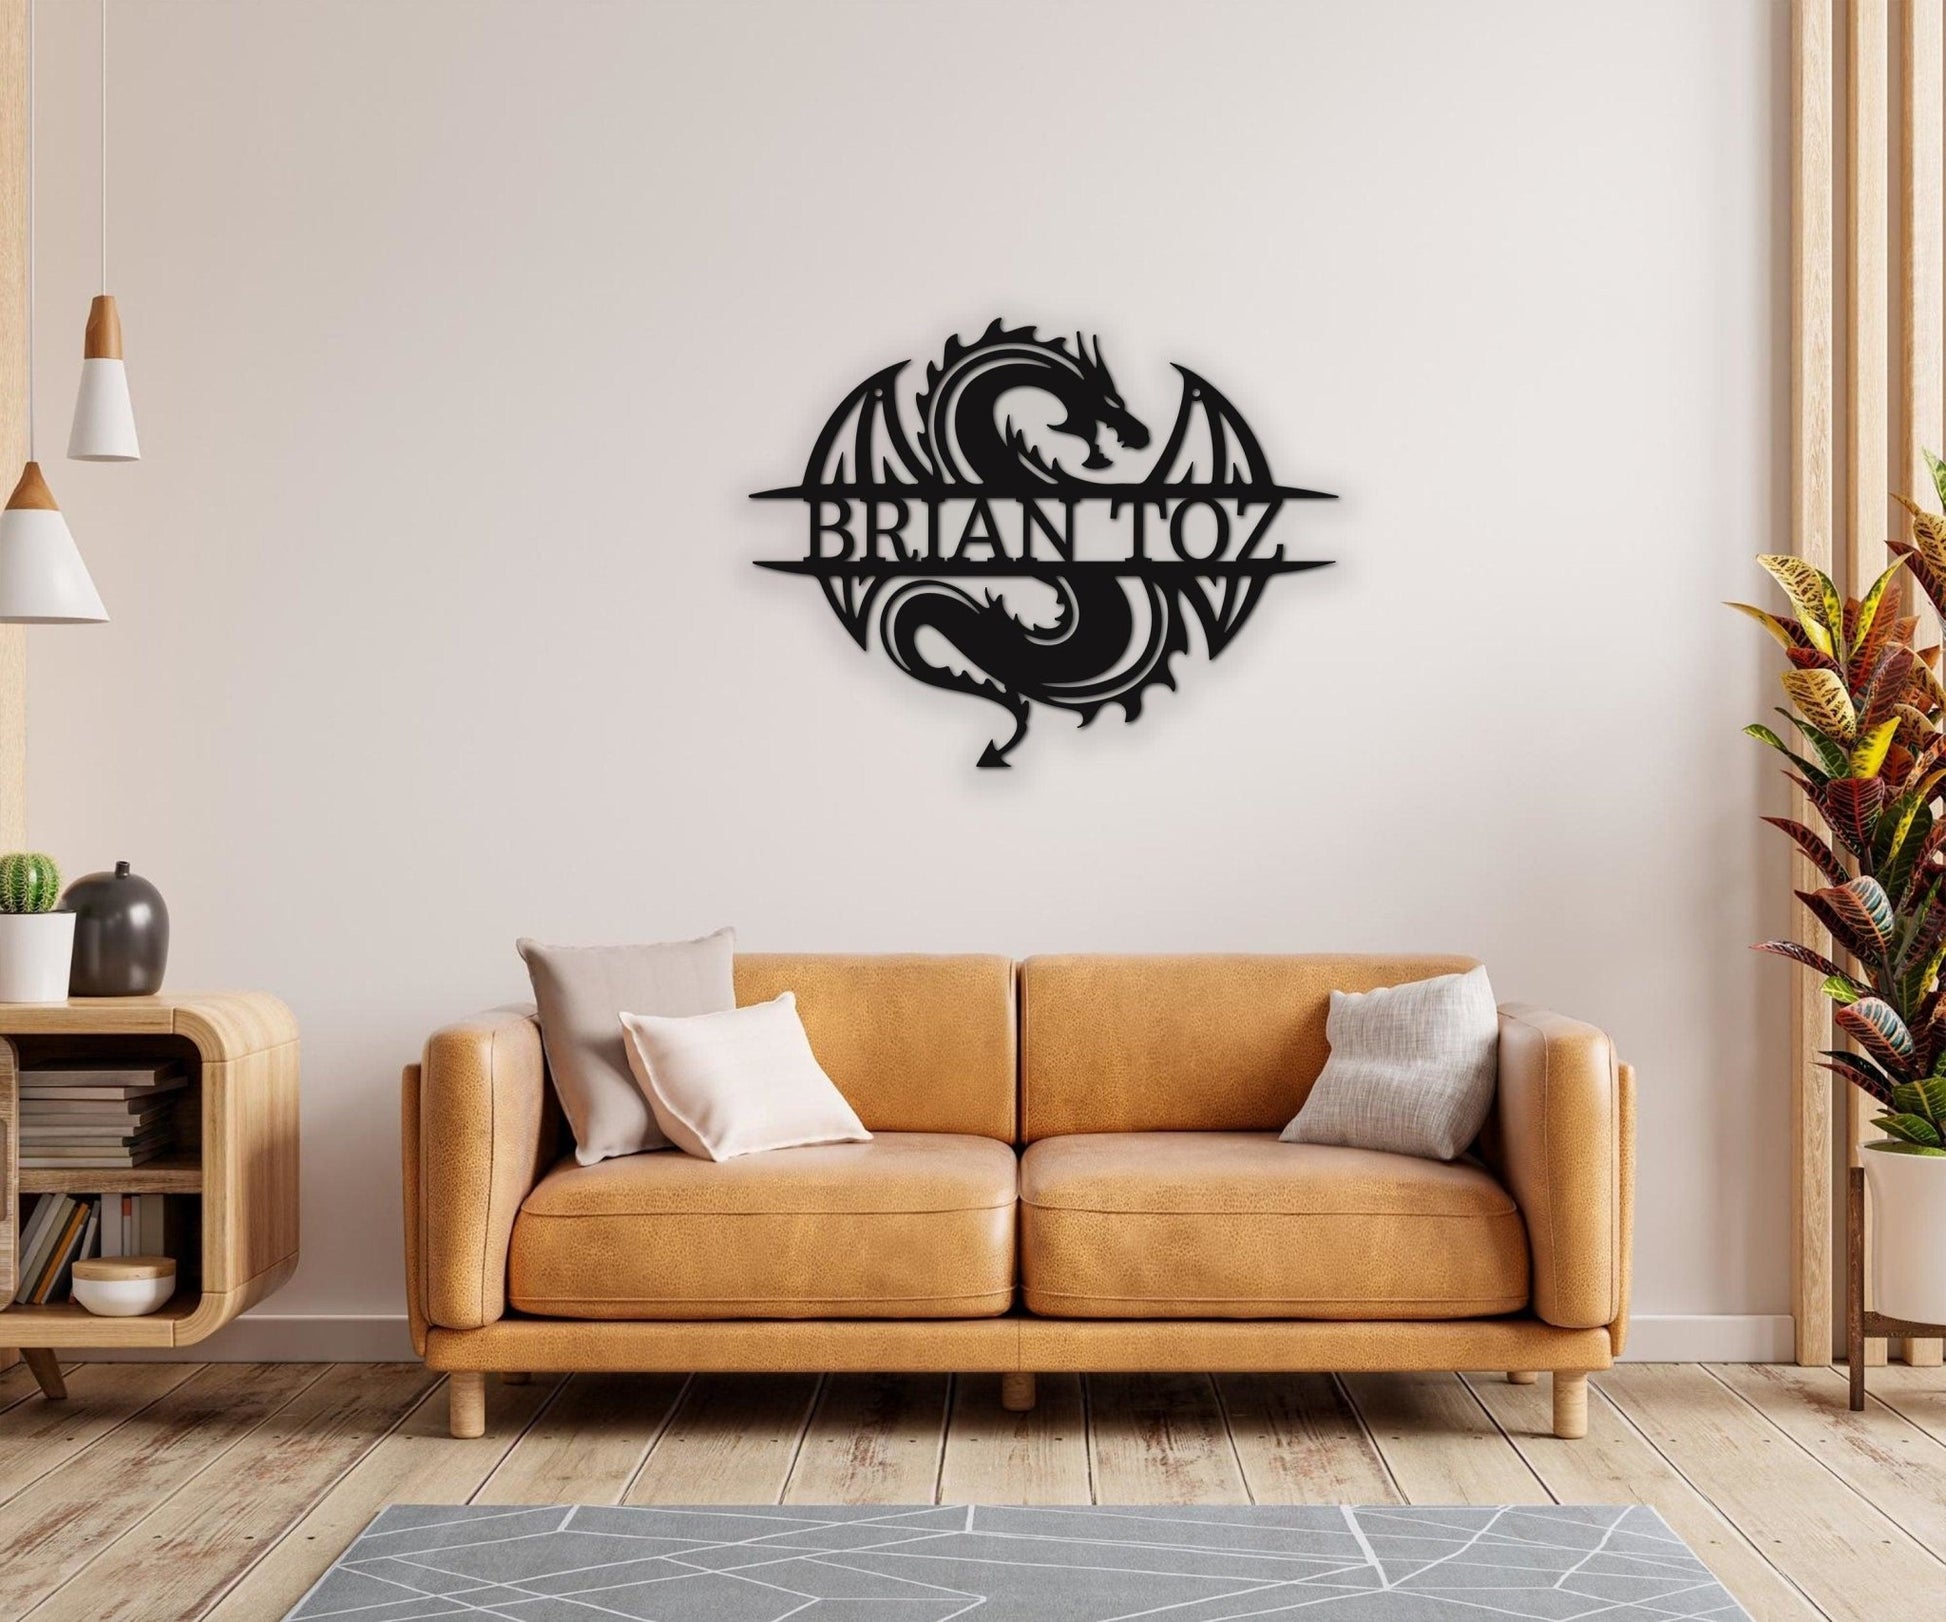 Celtic Dragon Lover Gift - Personalized Metal Signs for Dragon-themed Home Decor - Stylinsoul